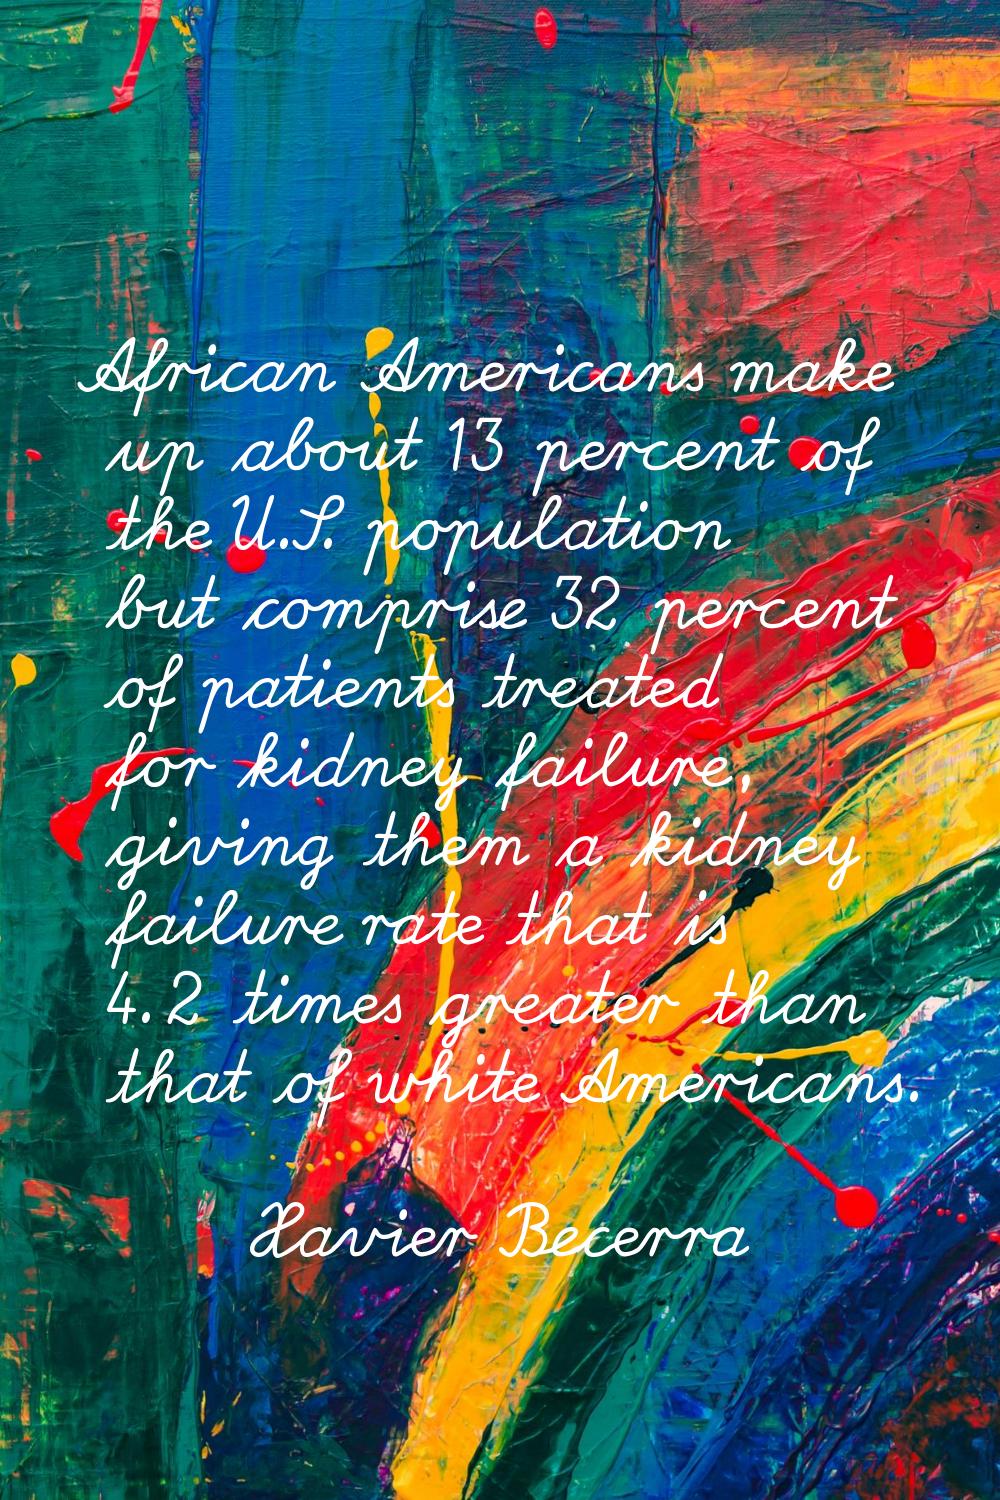 African Americans make up about 13 percent of the U.S. population but comprise 32 percent of patien